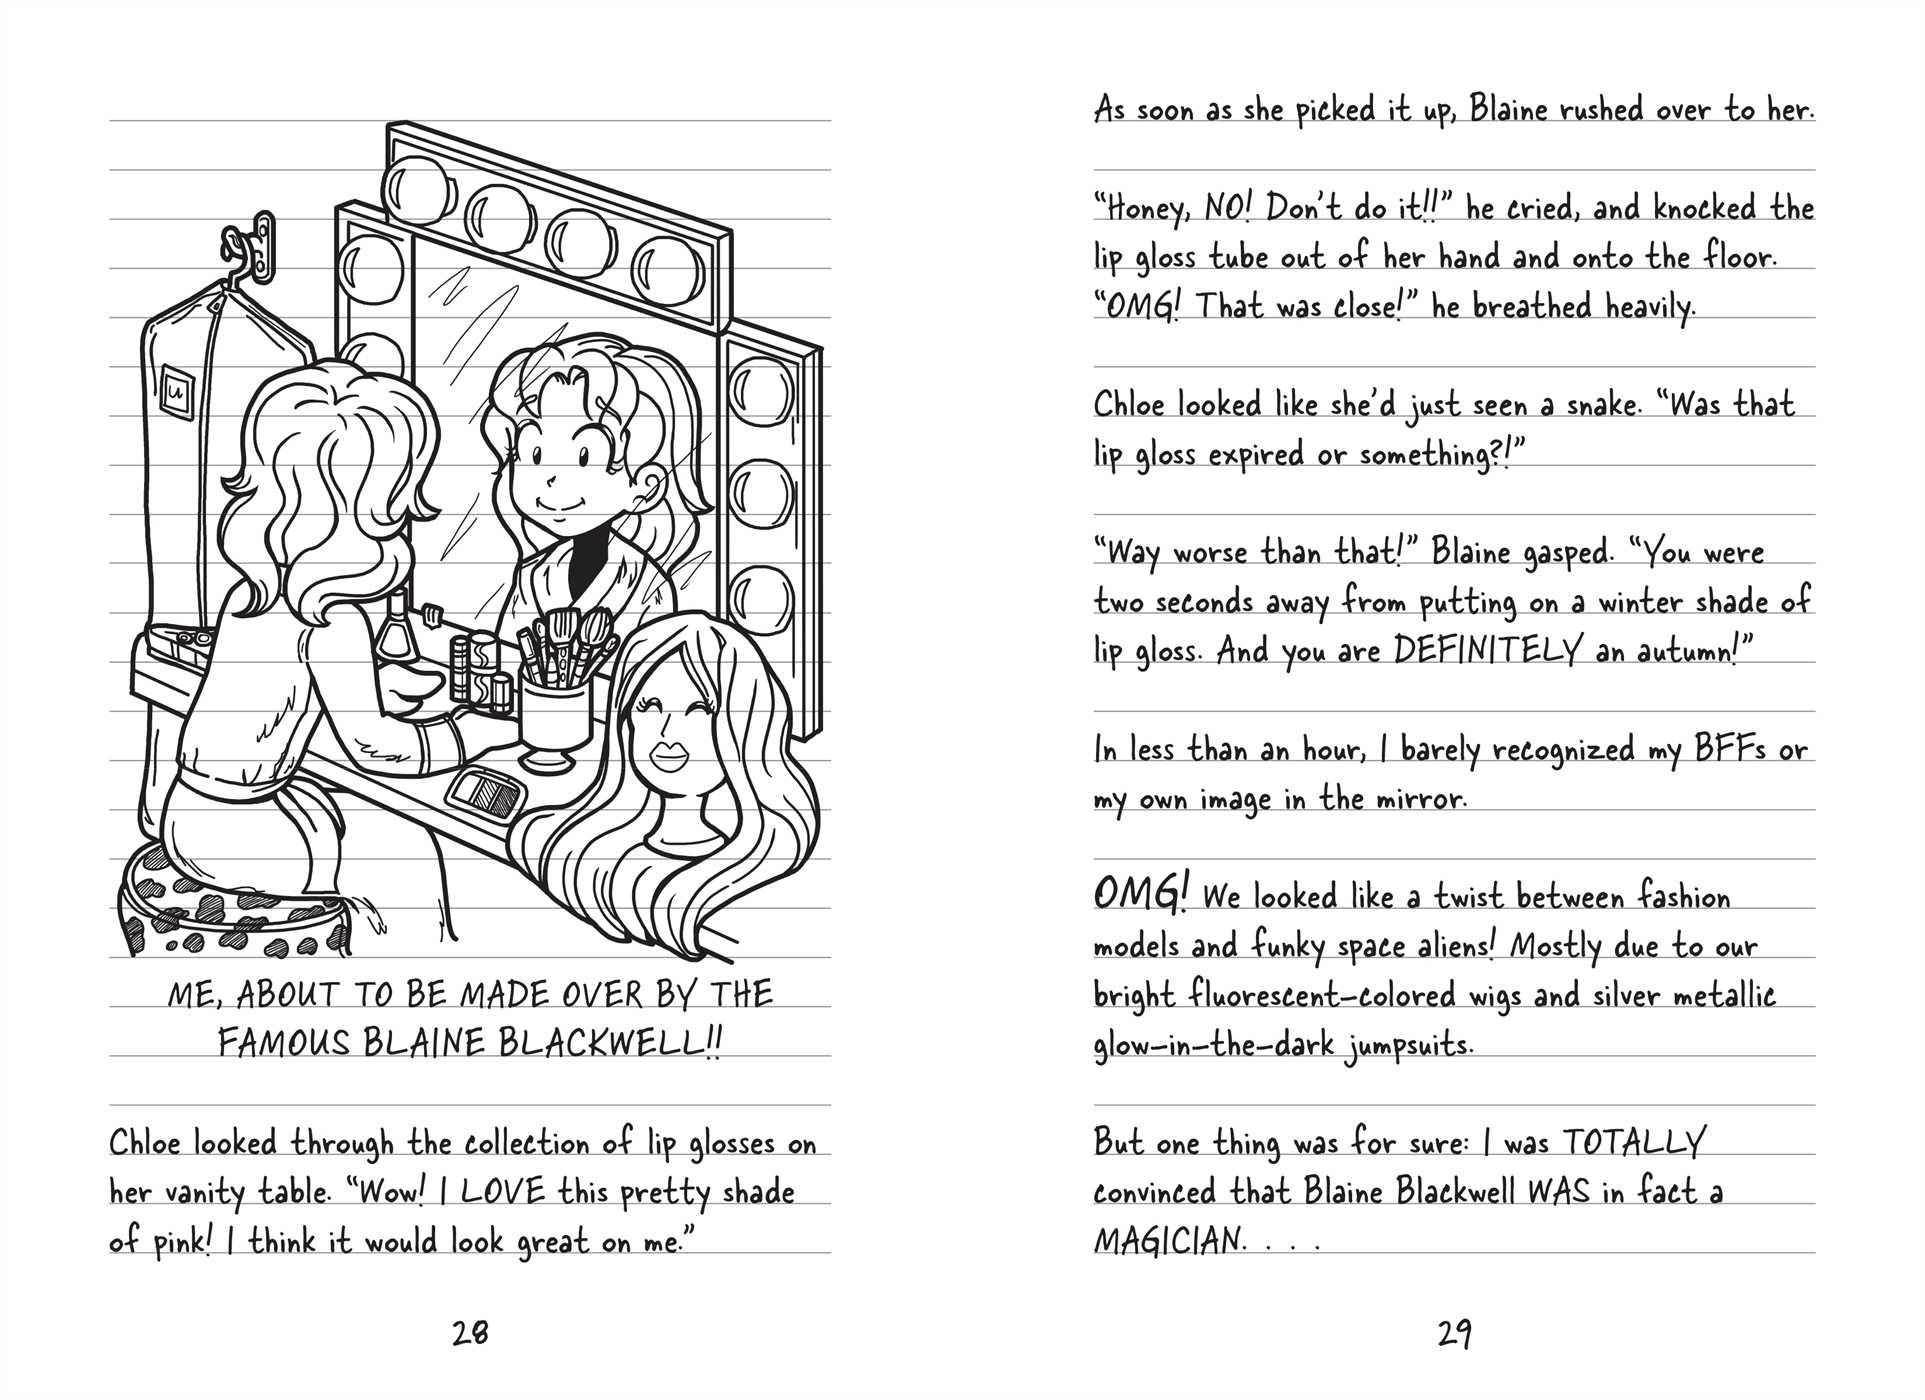 Dork Diaries 7: Tales from a Not-So-Glam TV Star (7)